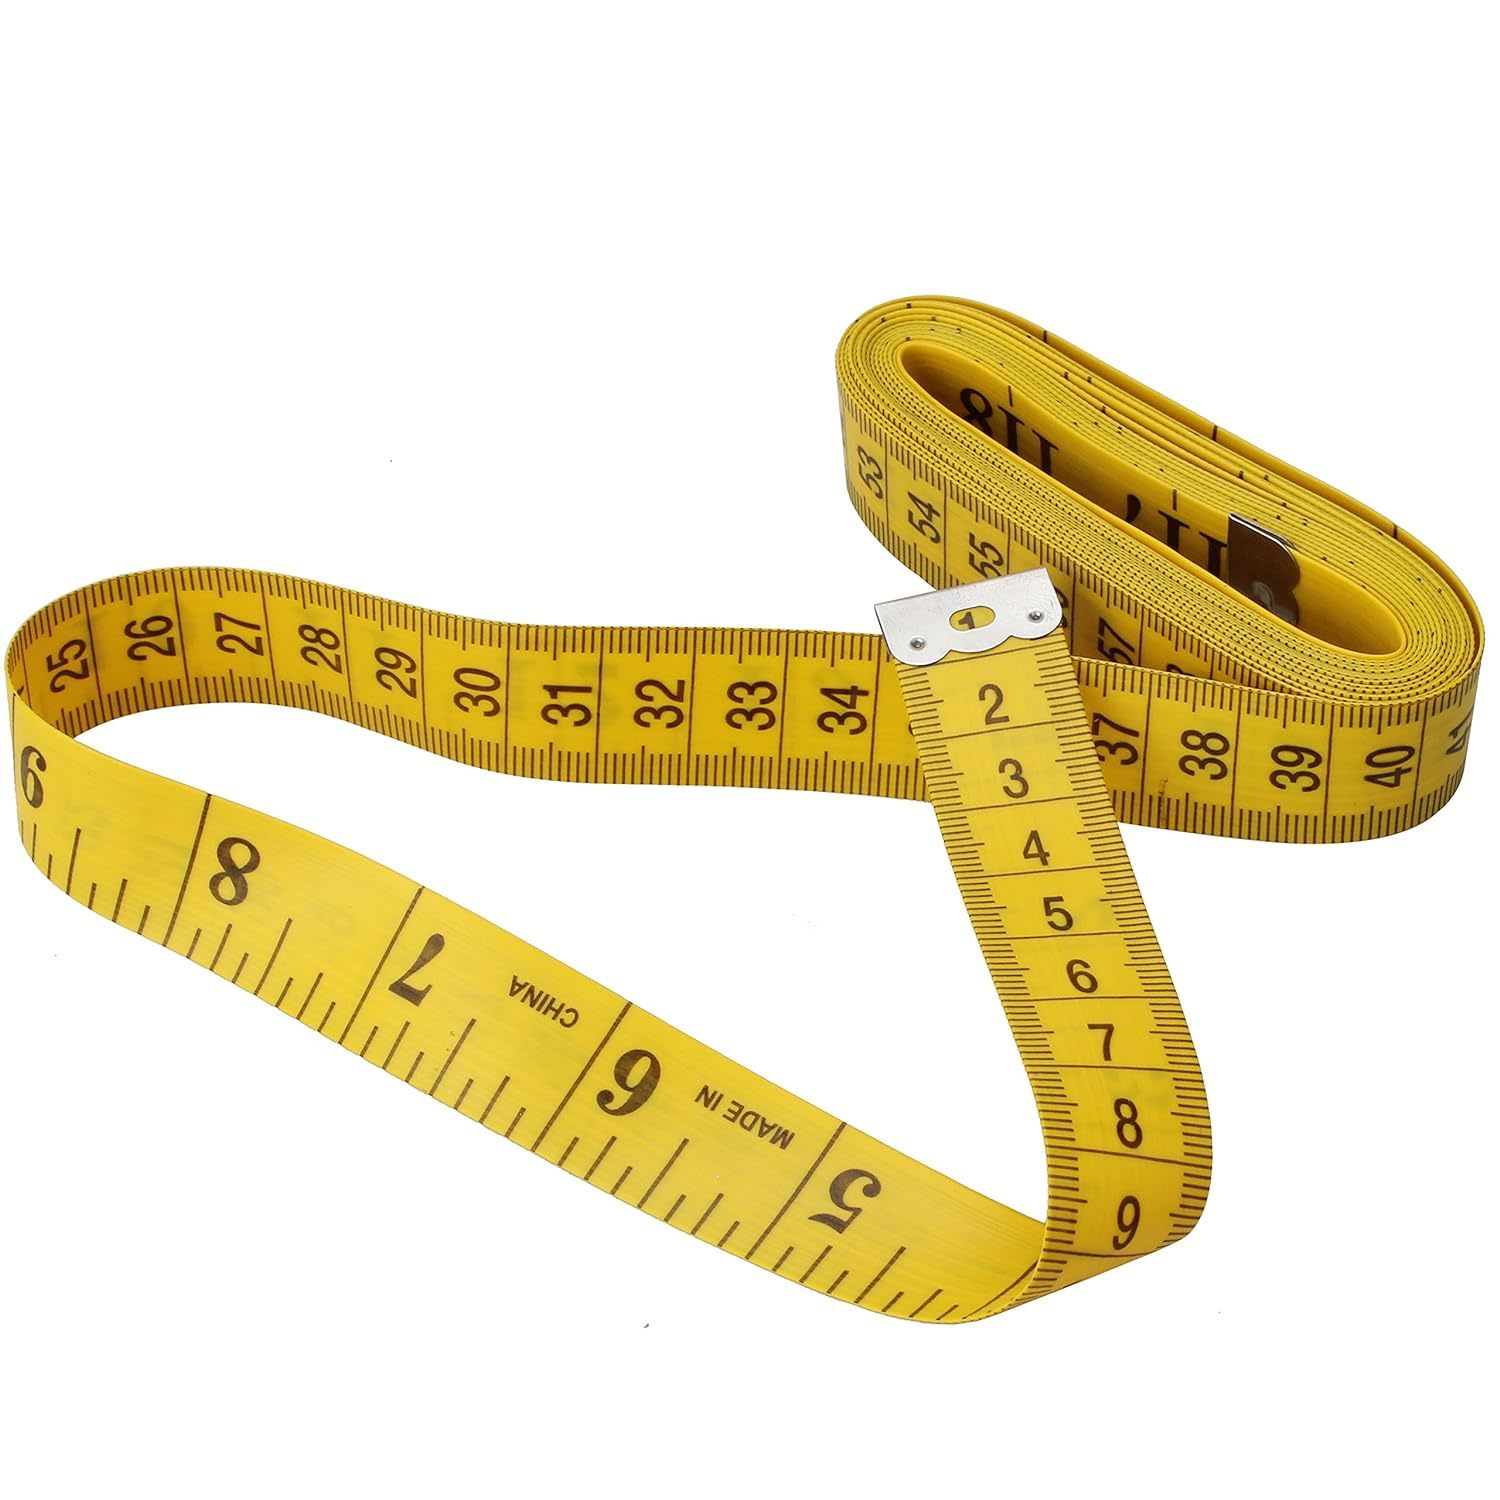 120 Inches/300cm Cloth Measuring Tape for Body Measurements, Soft